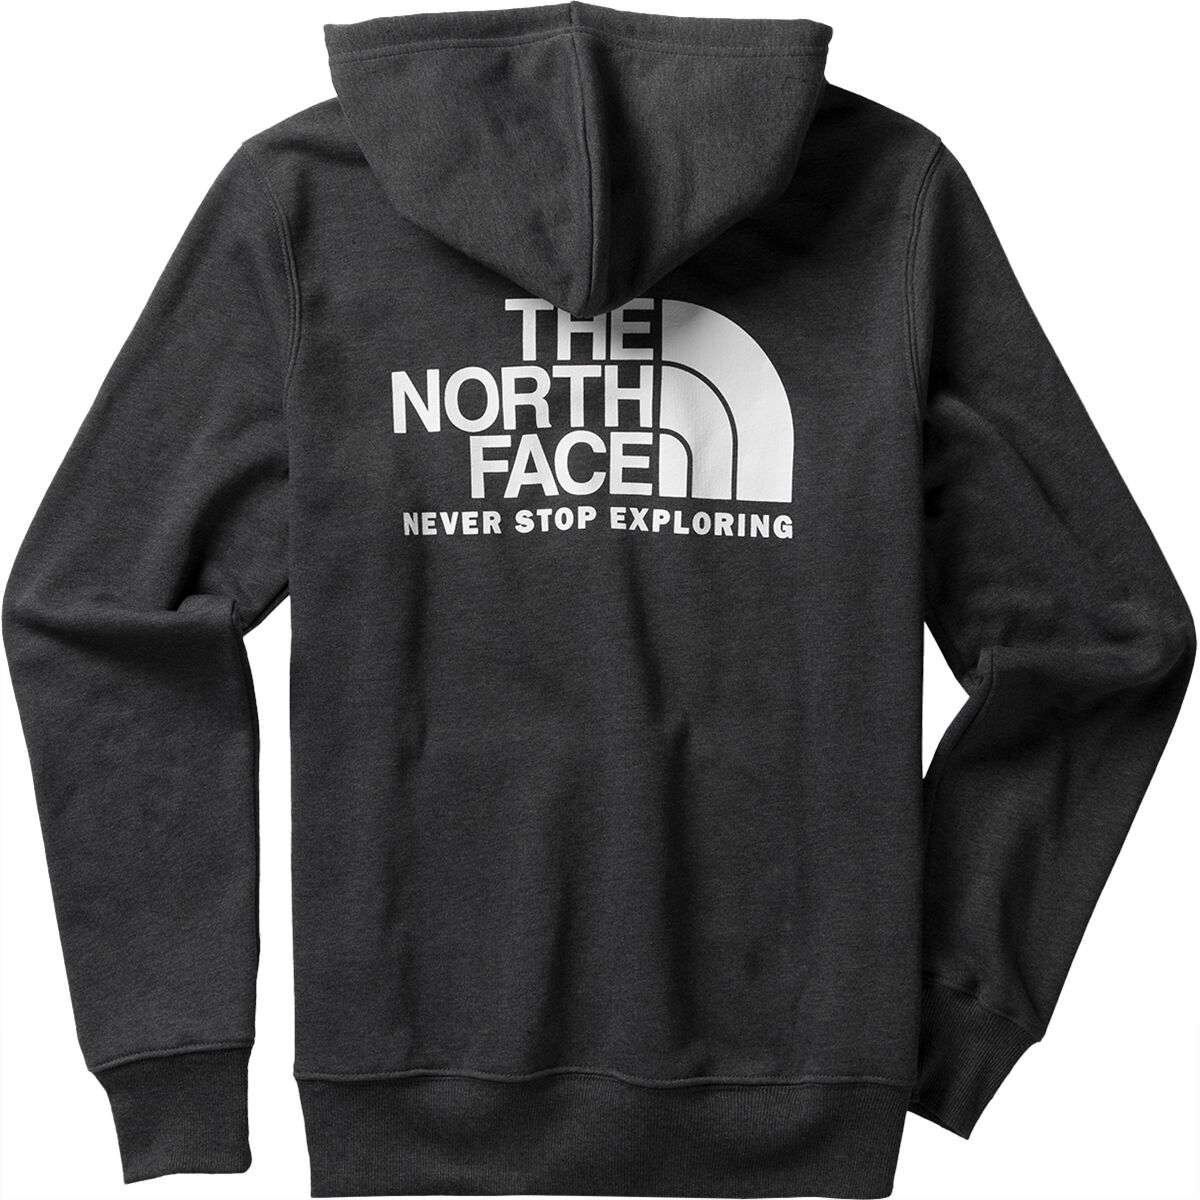 The North Face 80/20 Throwback Hoodie - Men's